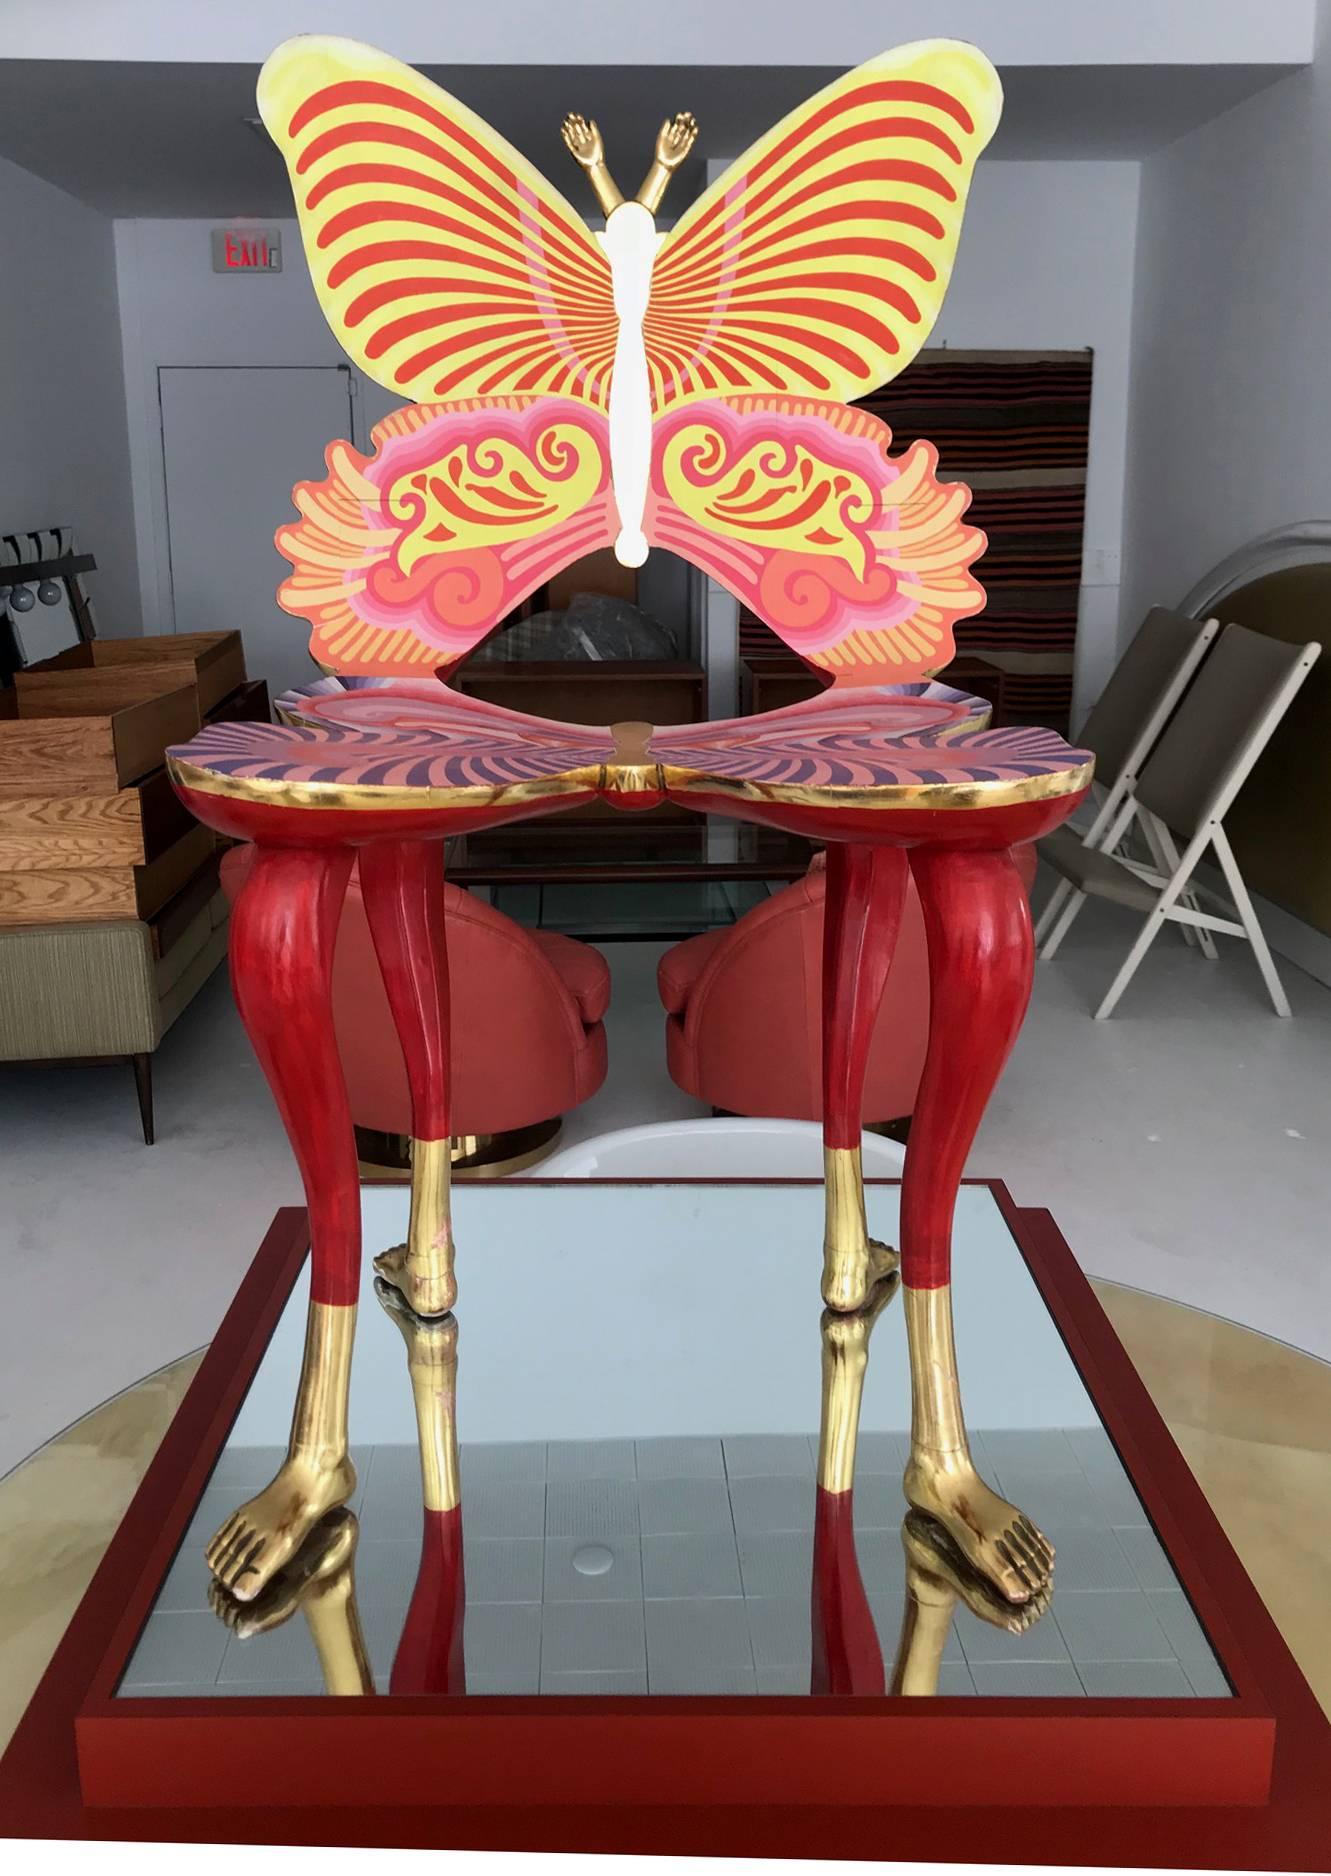 An iconic sculptural Butterfly Chair by Mexican surrealist artist and designer Pedro Friedeberg,
circa 1970s.
Material: painted wood with gilt and polychromes.
Label